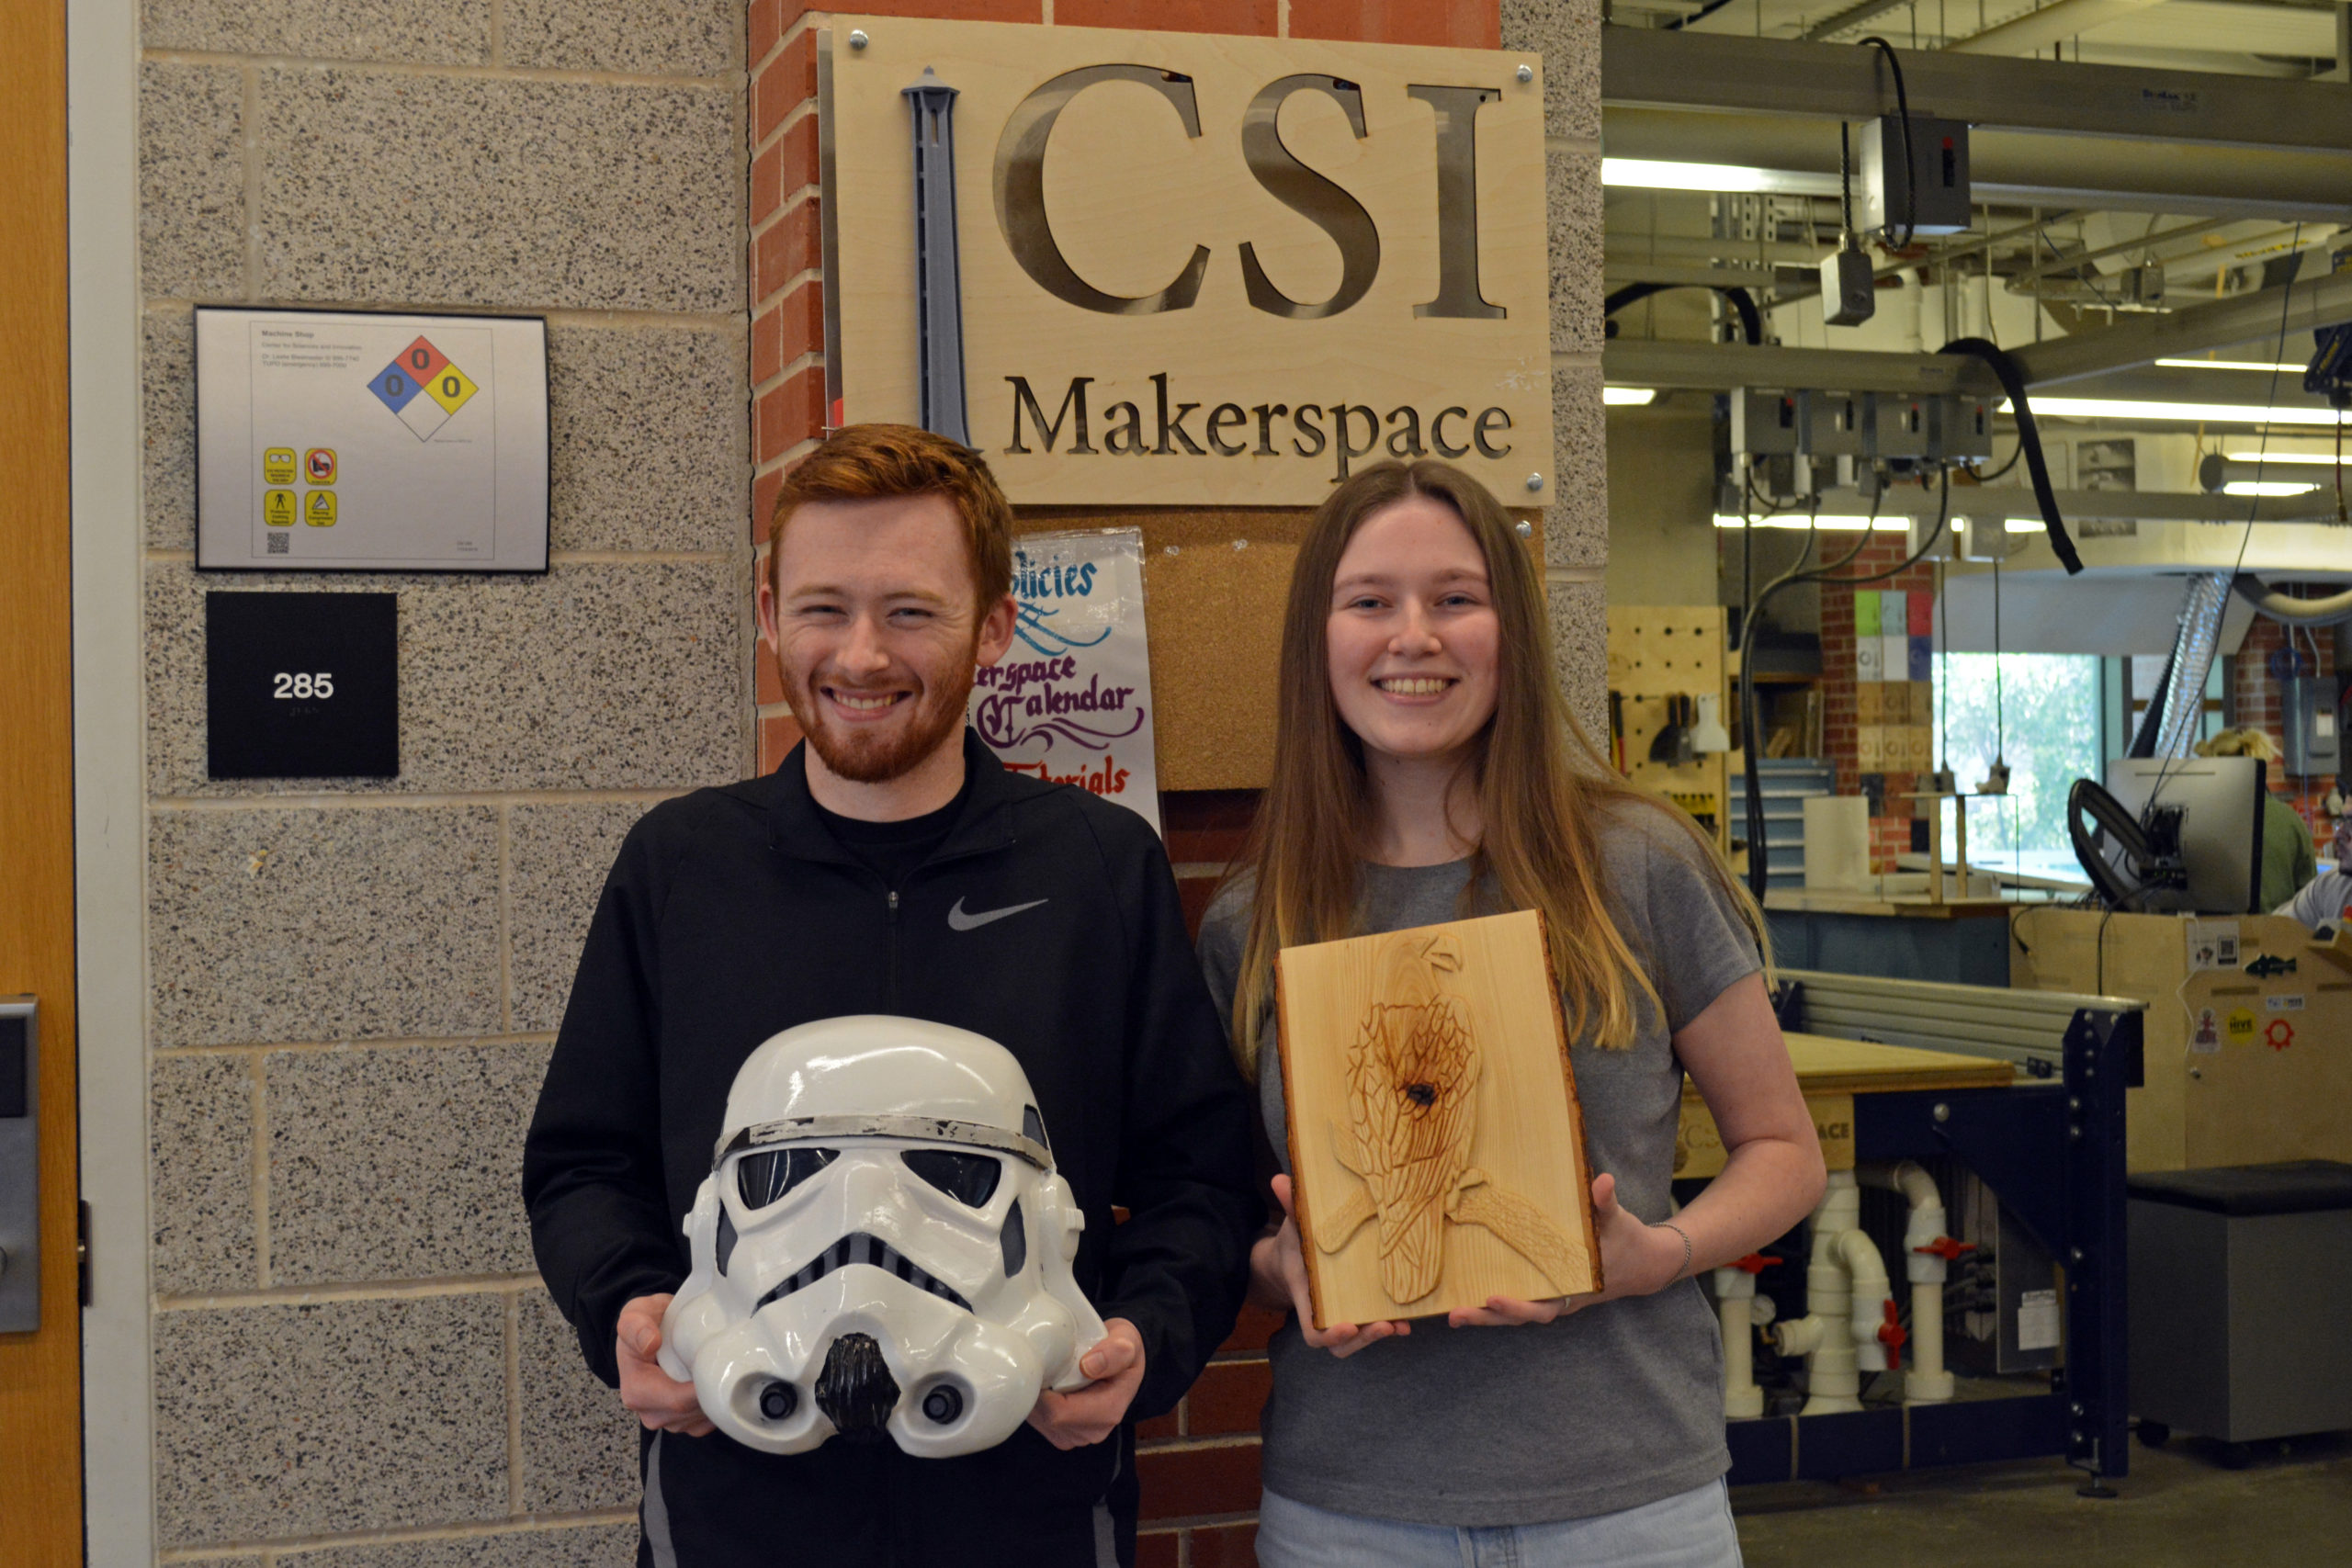 Dawson Durr and Grace Robertson show off their designs made in the MakerSpace.